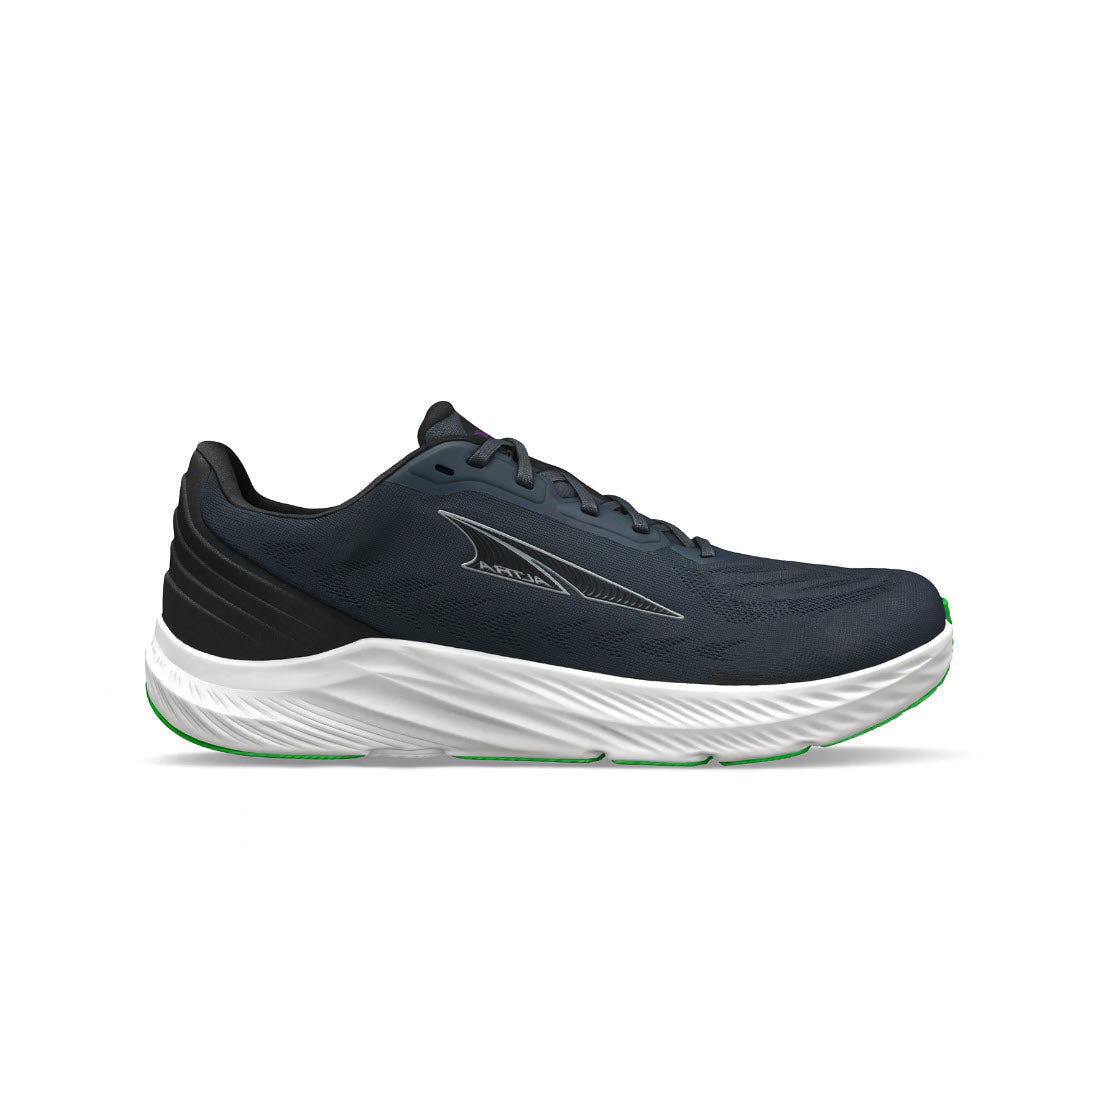 A single Altra Rivera 4 Black running shoe with a sleek design and green accents on the responsive midsole cushion, displayed against a plain white background.